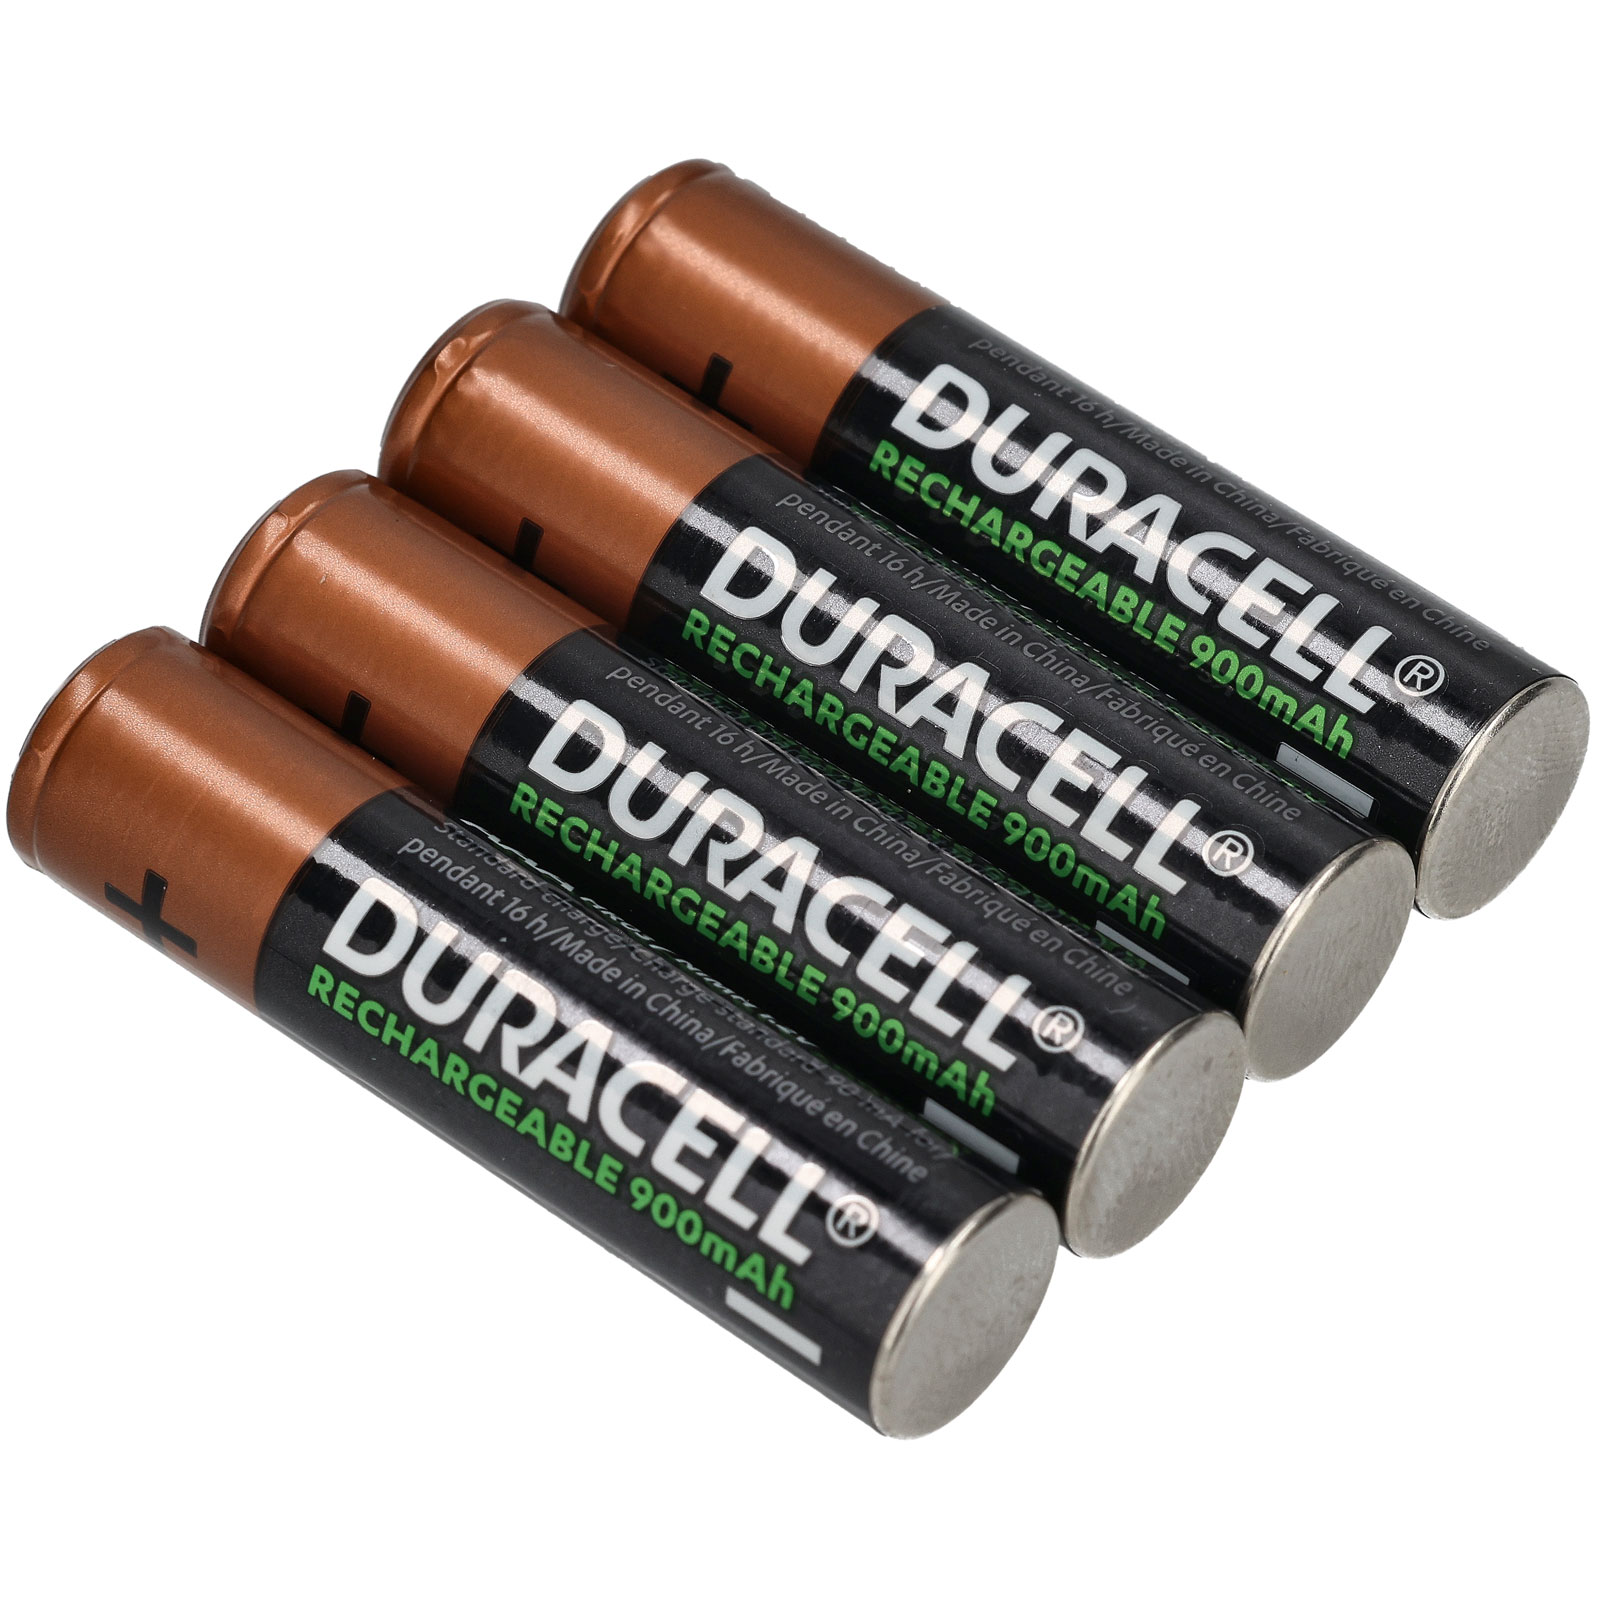 Duracell Rechargeable Batteries AAA 900mAh With or W/O Fast Charger lot  NiMH NEW